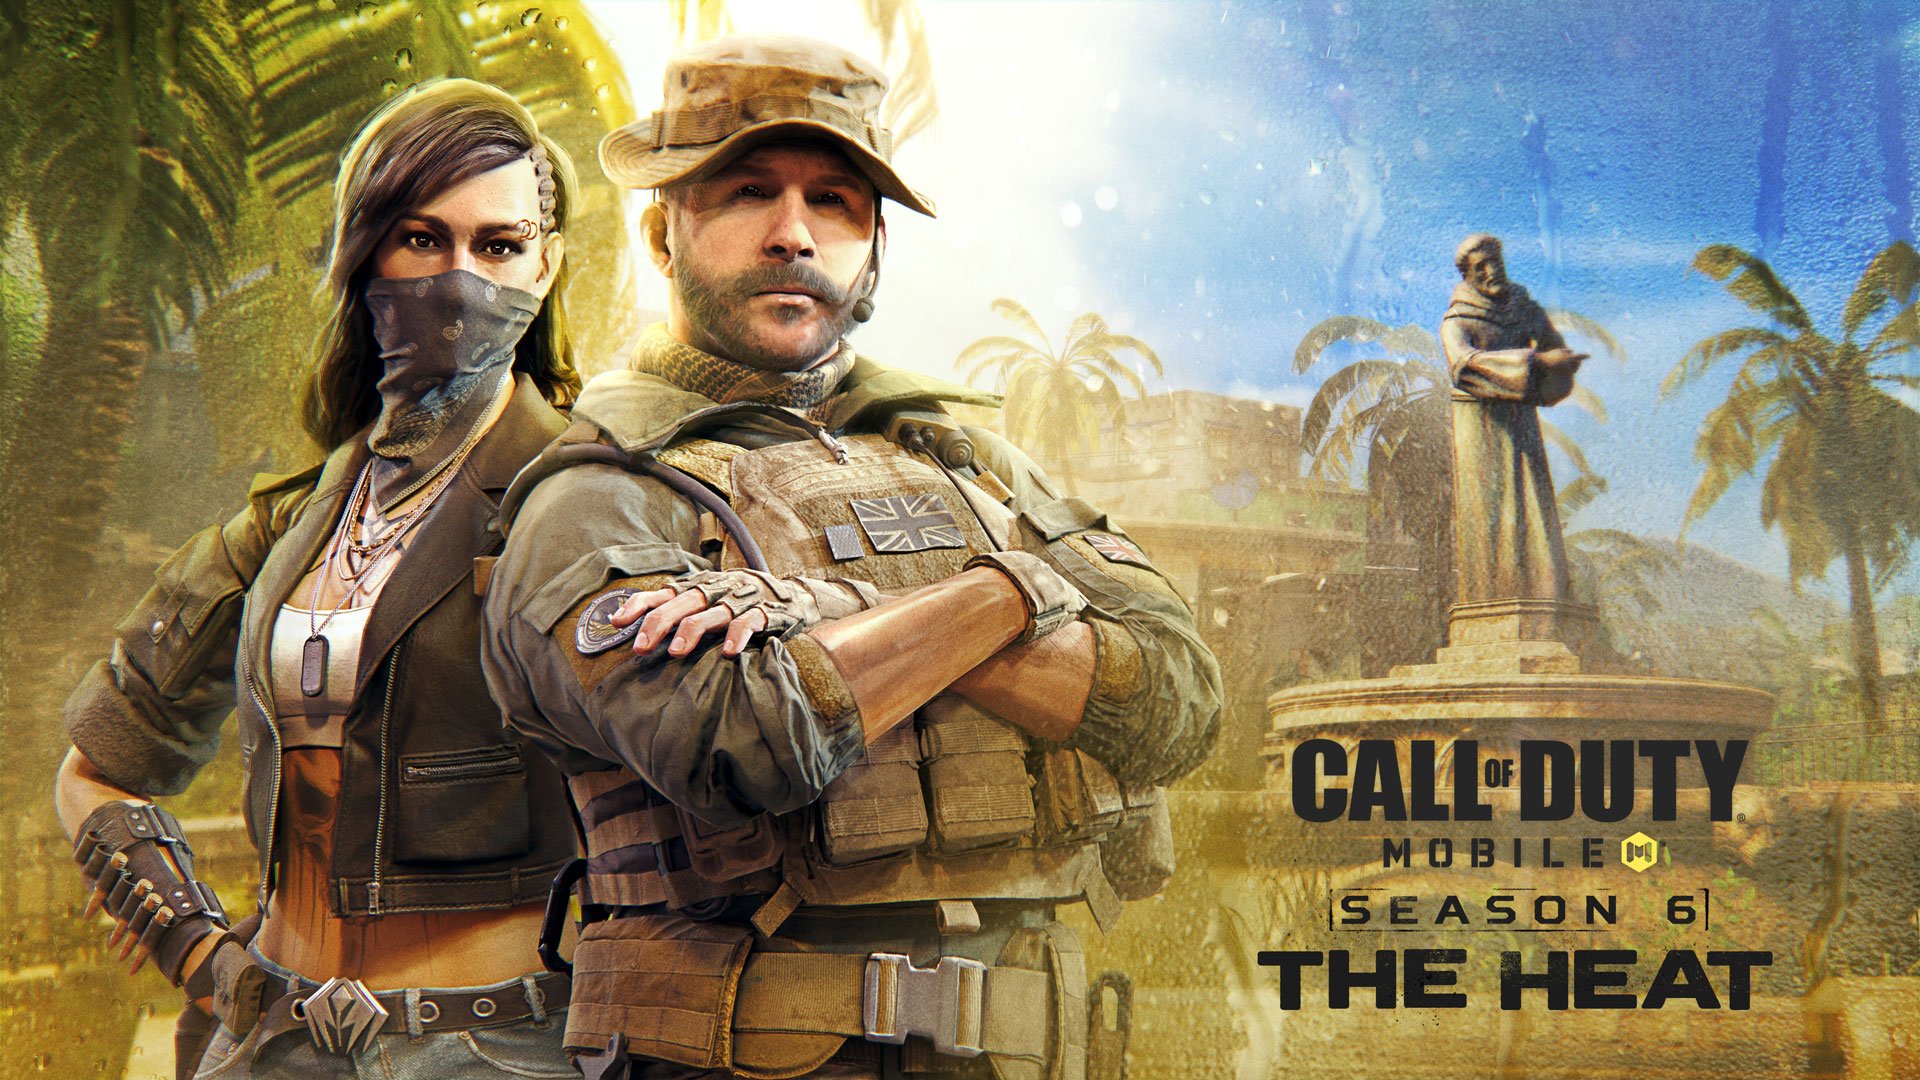 Turn Up the Heat in Season Six of Call of Duty®: Mobile